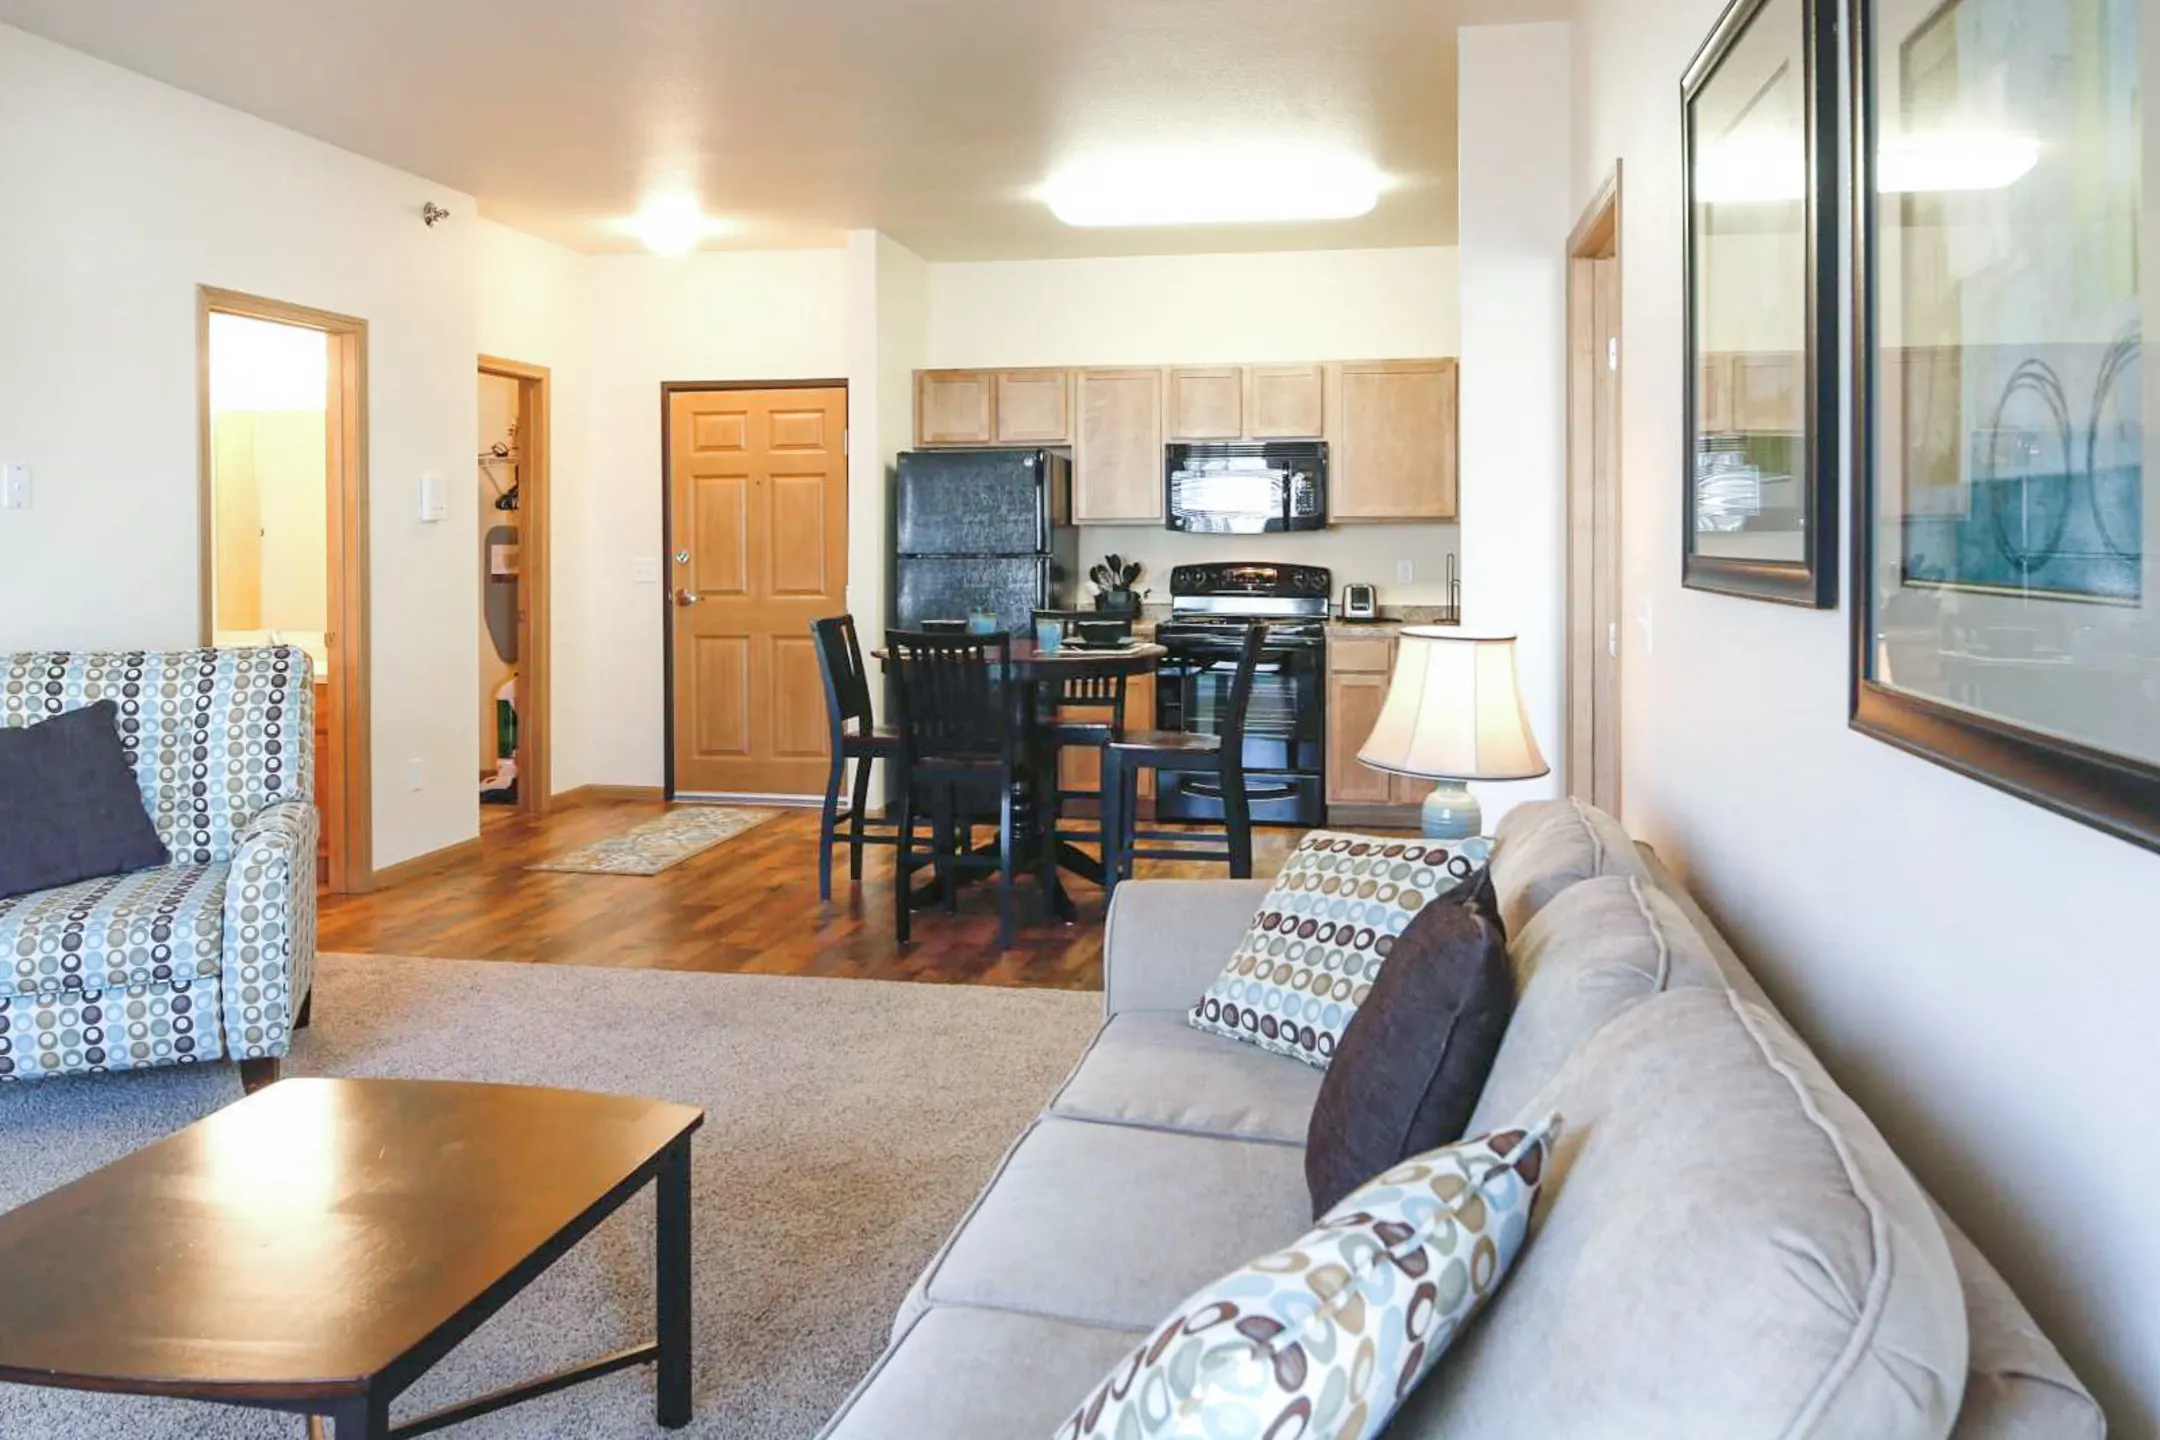 Living Room - Amber Pointe Apartments - Fargo, ND